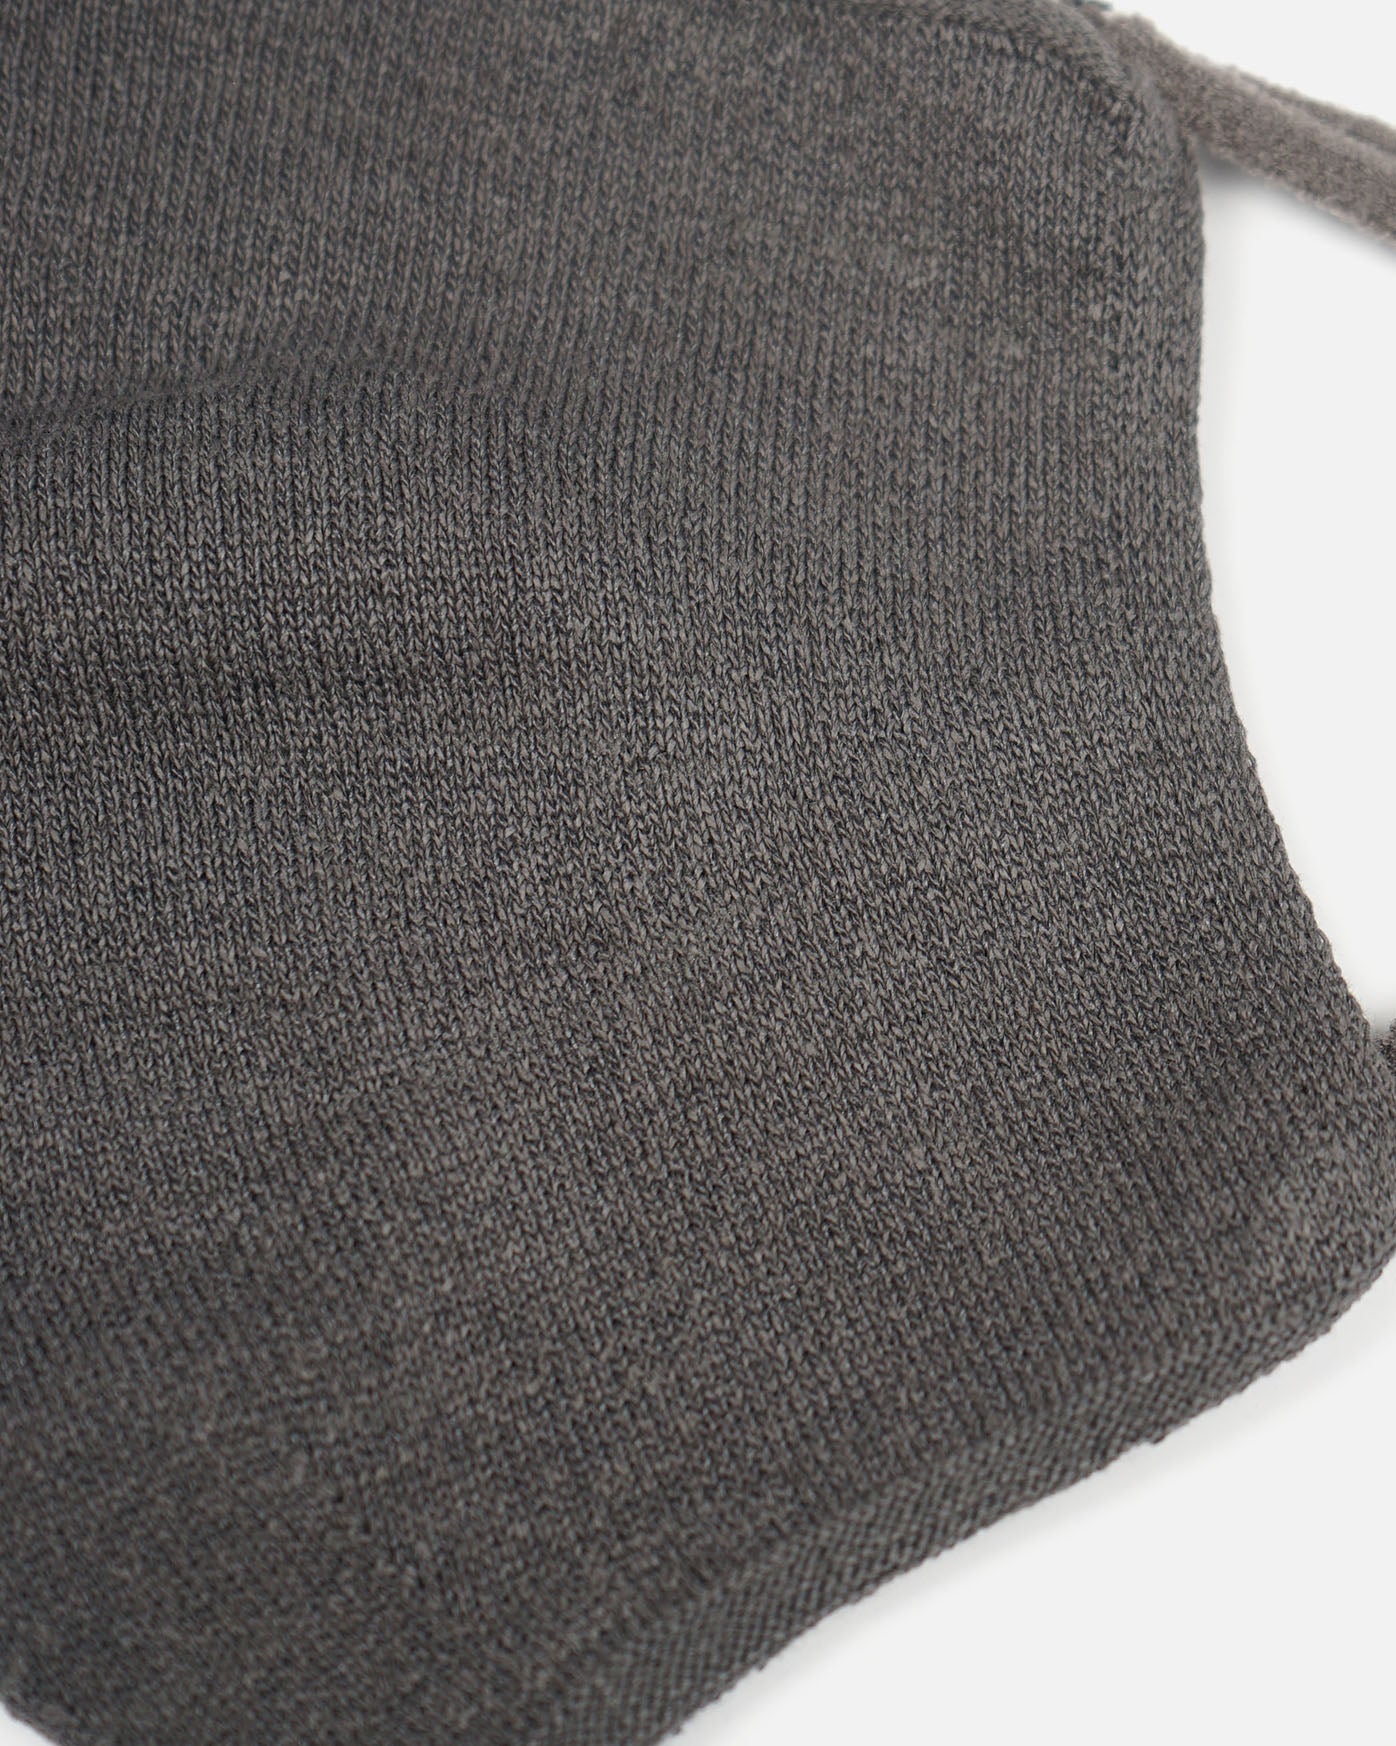 Seamless Knit Face Mask Made in Japan